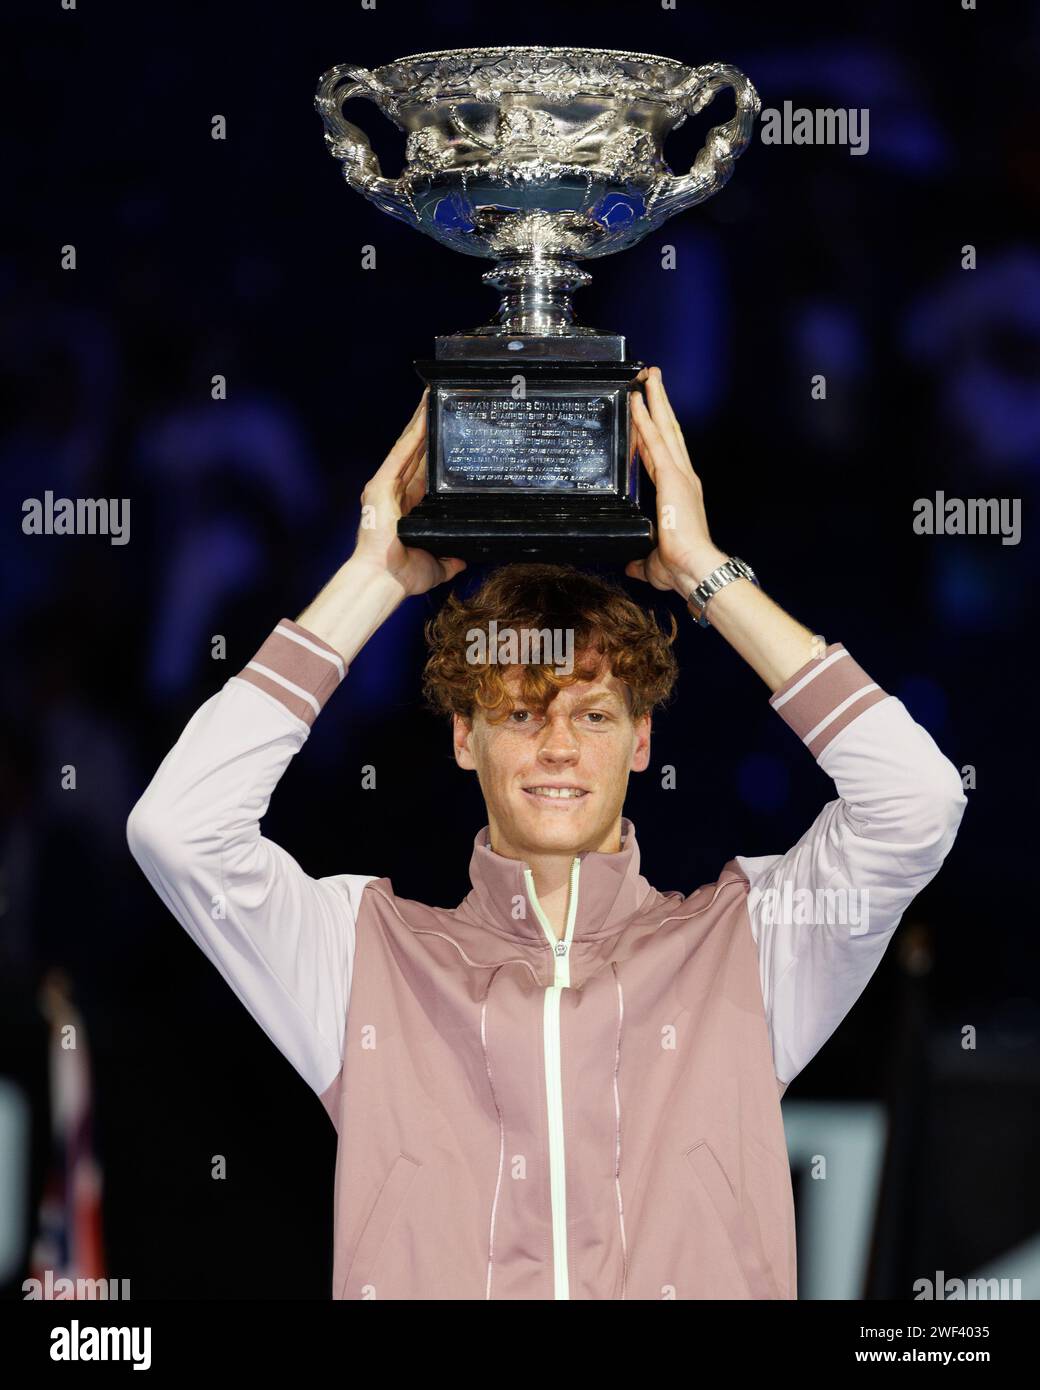 Melbourne, Australia. 28th Jan, 2024. 4th seed JANNIK SINNER of Italy poses with the Norman Brookes Challenge Cup after winning the Men's Singles Final match against Danil Medvedev of the Russian Federation on Rod Laver Arena on day 15 of the 2024 Australian Open in Melbourne, Australia. Sydney Low/Cal Sport Media/Alamy Live News Stock Photo